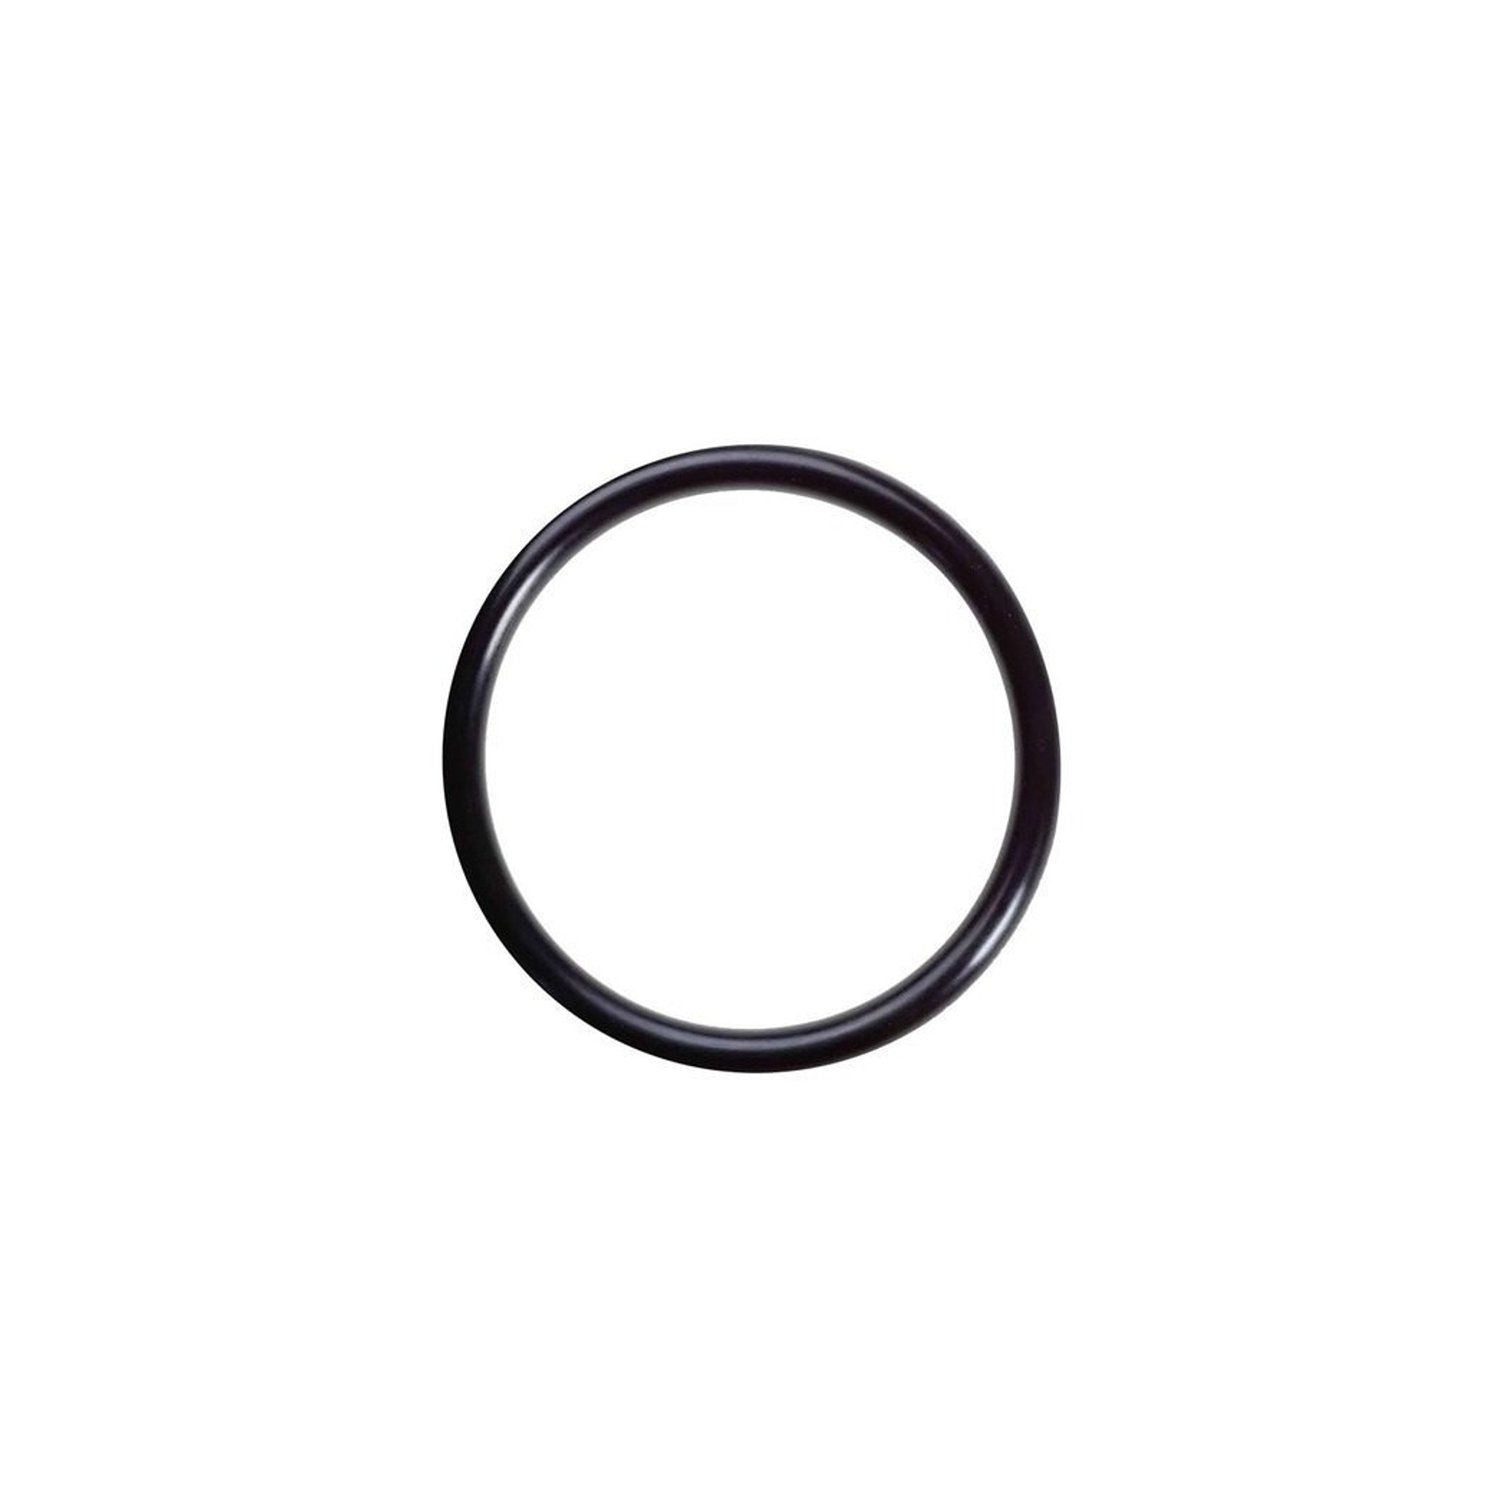 O-rings 8.8 x 1.9 mm 1 pc HNBR rubber, for air conditioners R12 & R134a